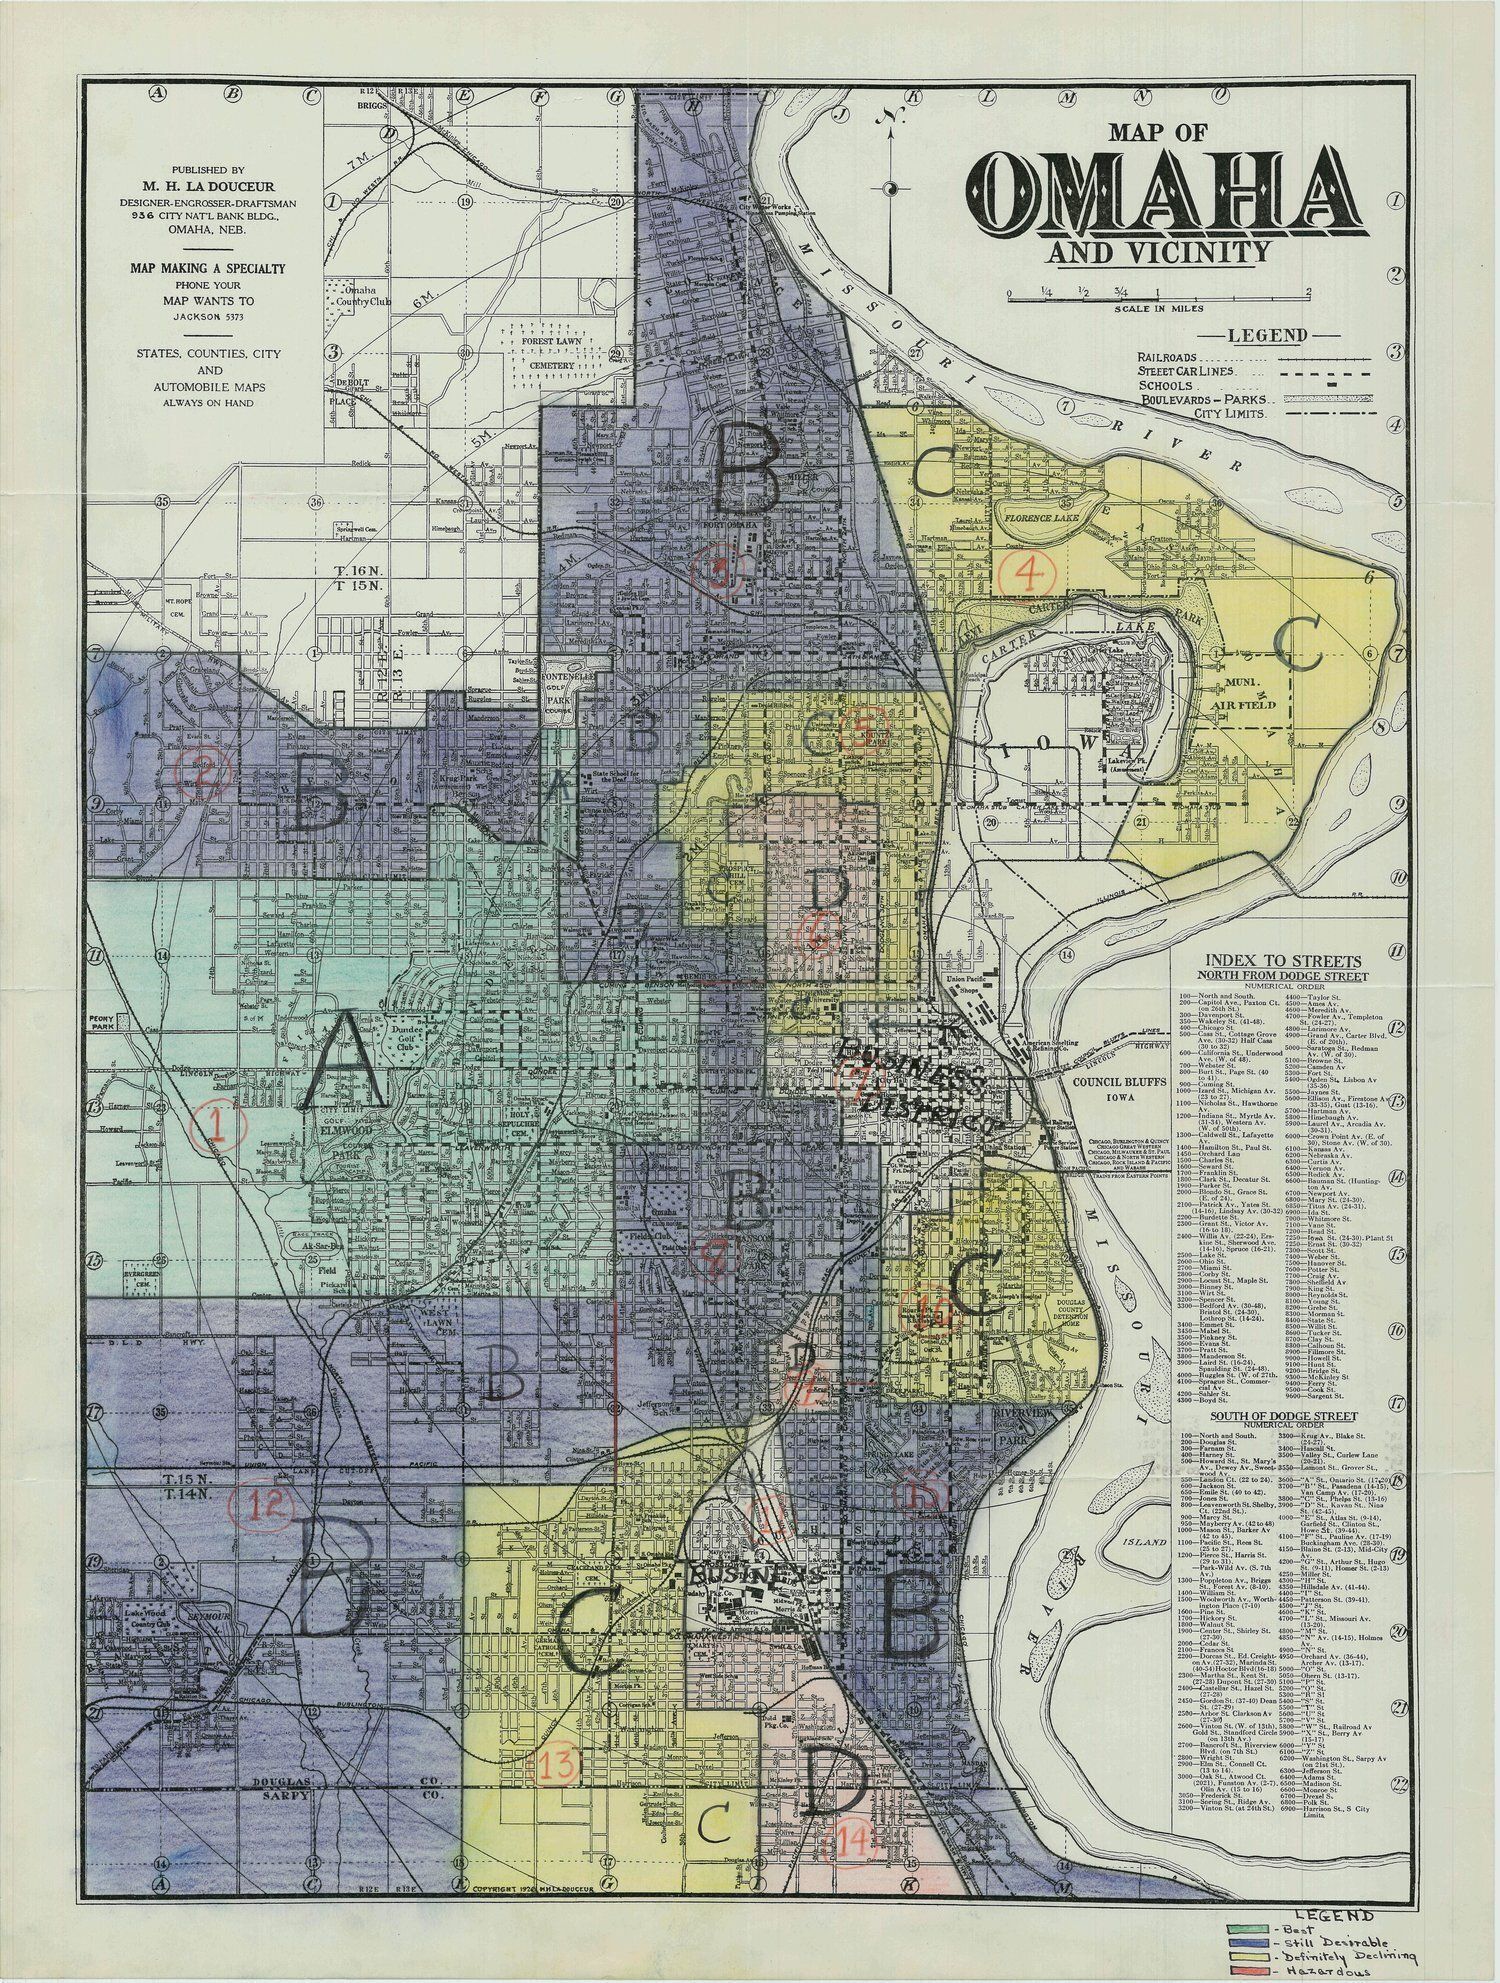 A map of Omaha from the 1940s shows red, green, blue, and yellow tones overlaid on the map.